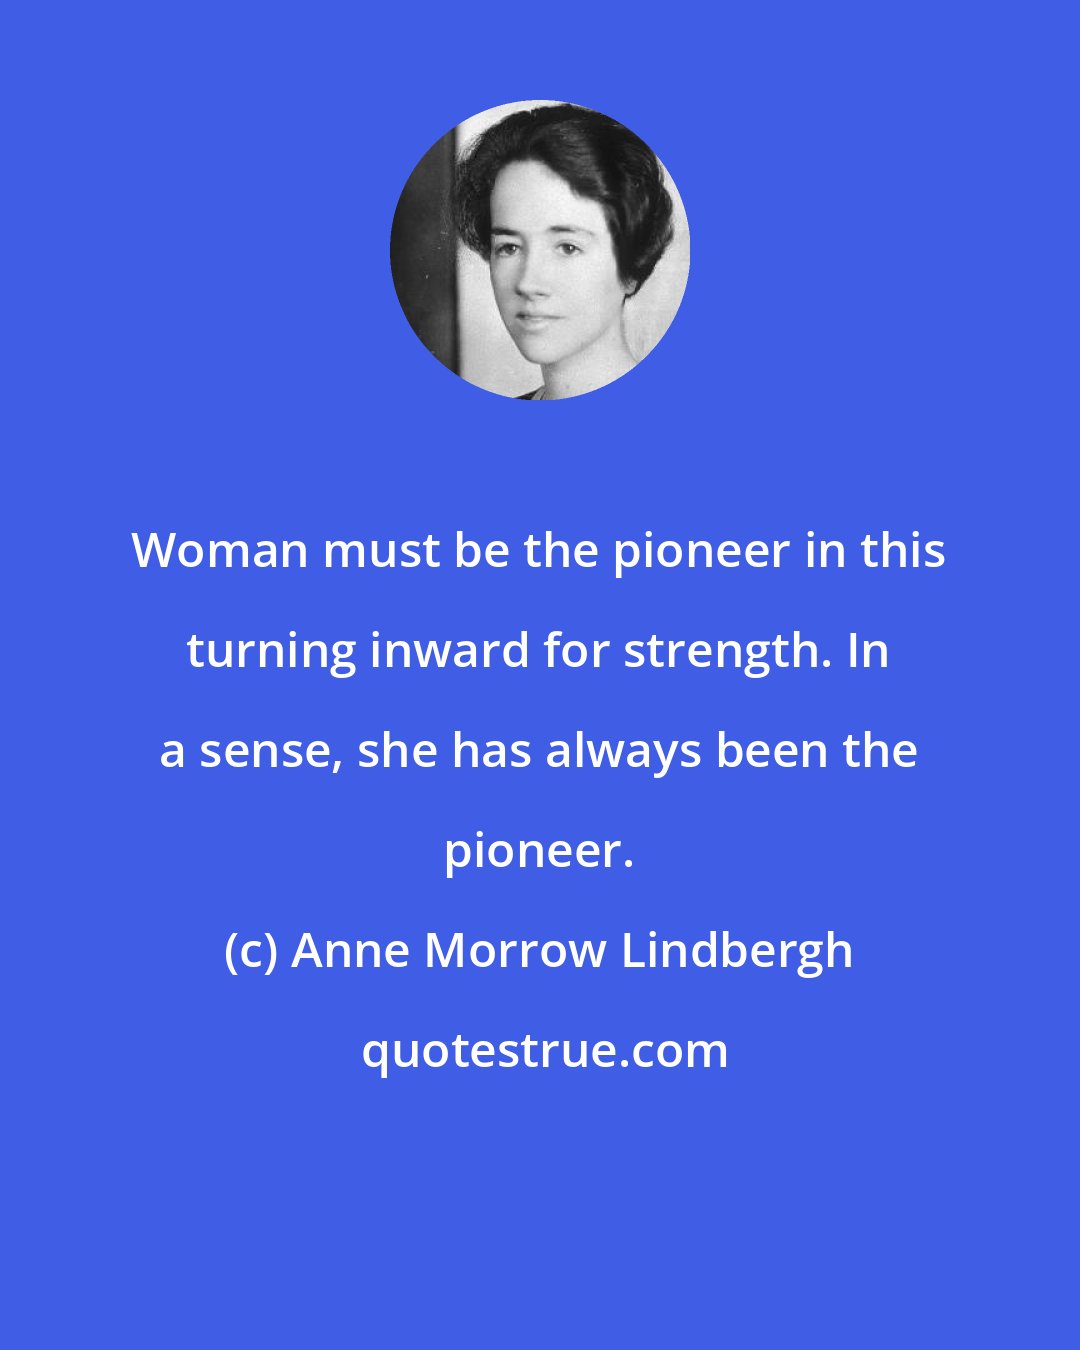 Anne Morrow Lindbergh: Woman must be the pioneer in this turning inward for strength. In a sense, she has always been the pioneer.